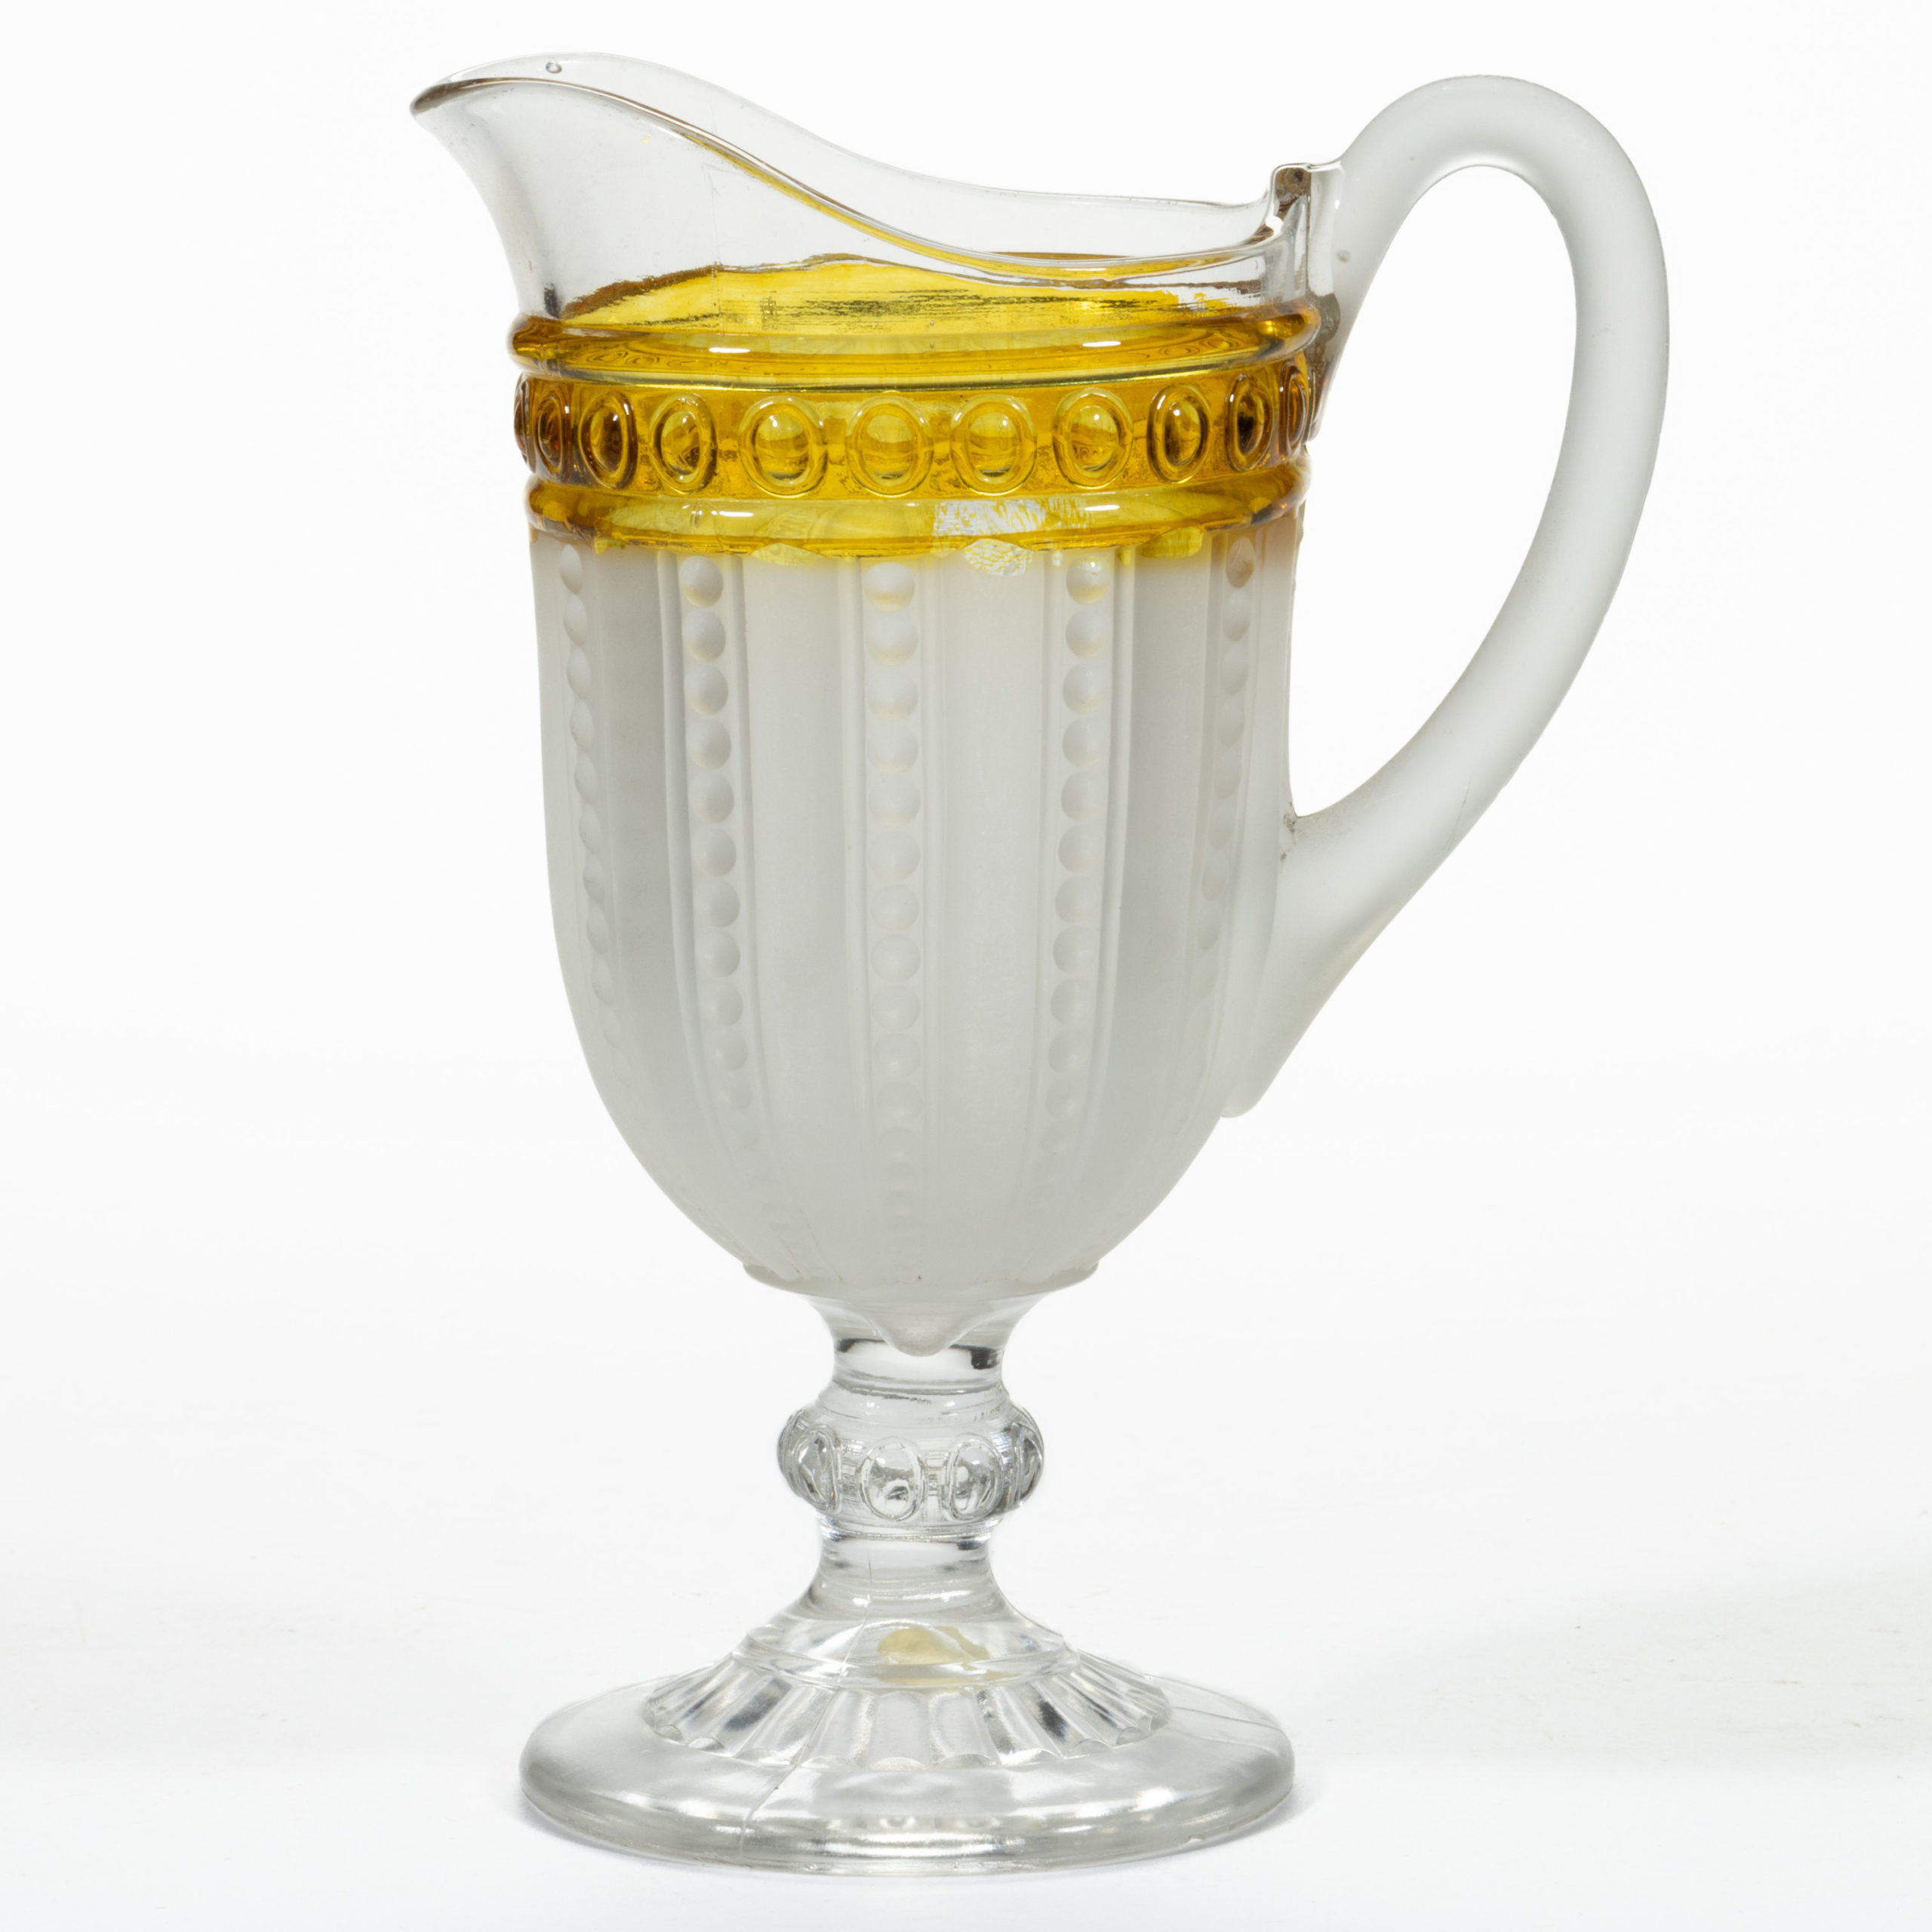 DUNCAN NO. 95 / GONTERMAN – AMBER-STAINED CREAMER,